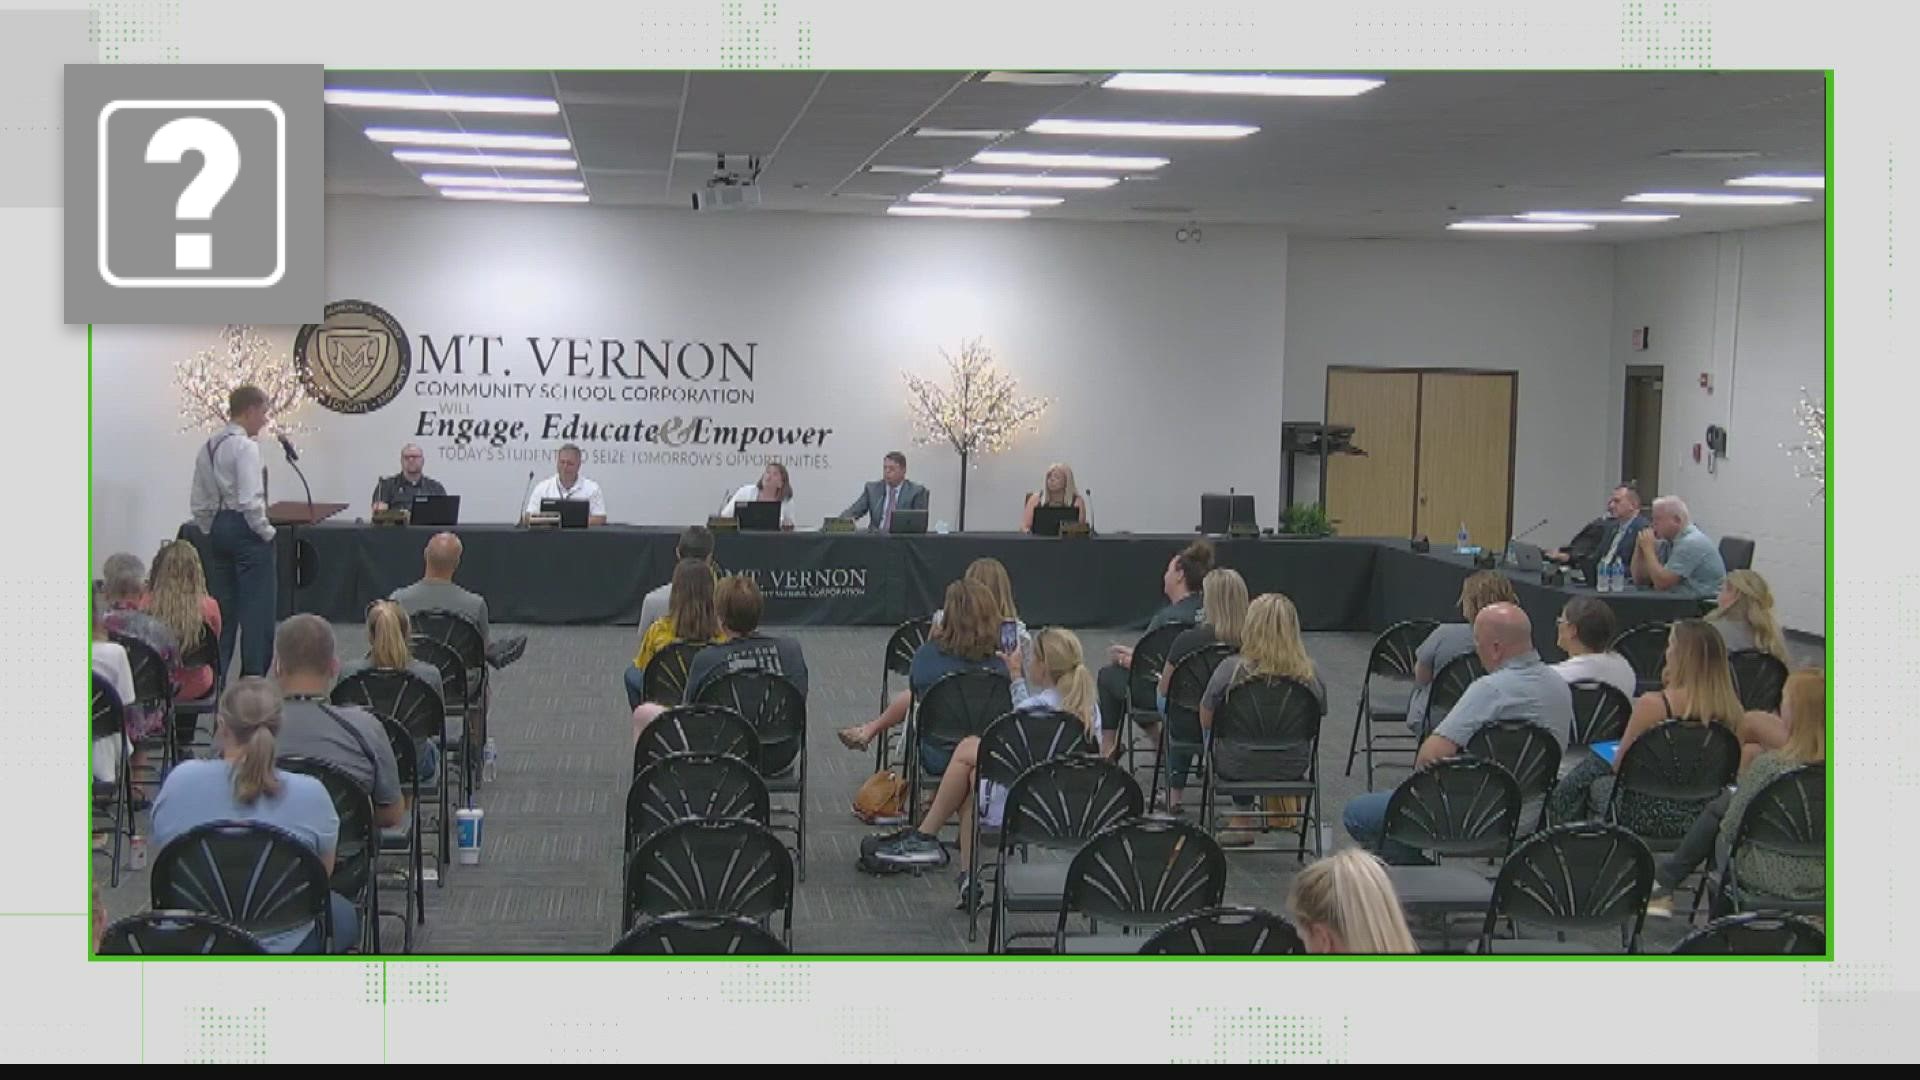 Video of a local doctor's presentation at a school board meeting is now viral.